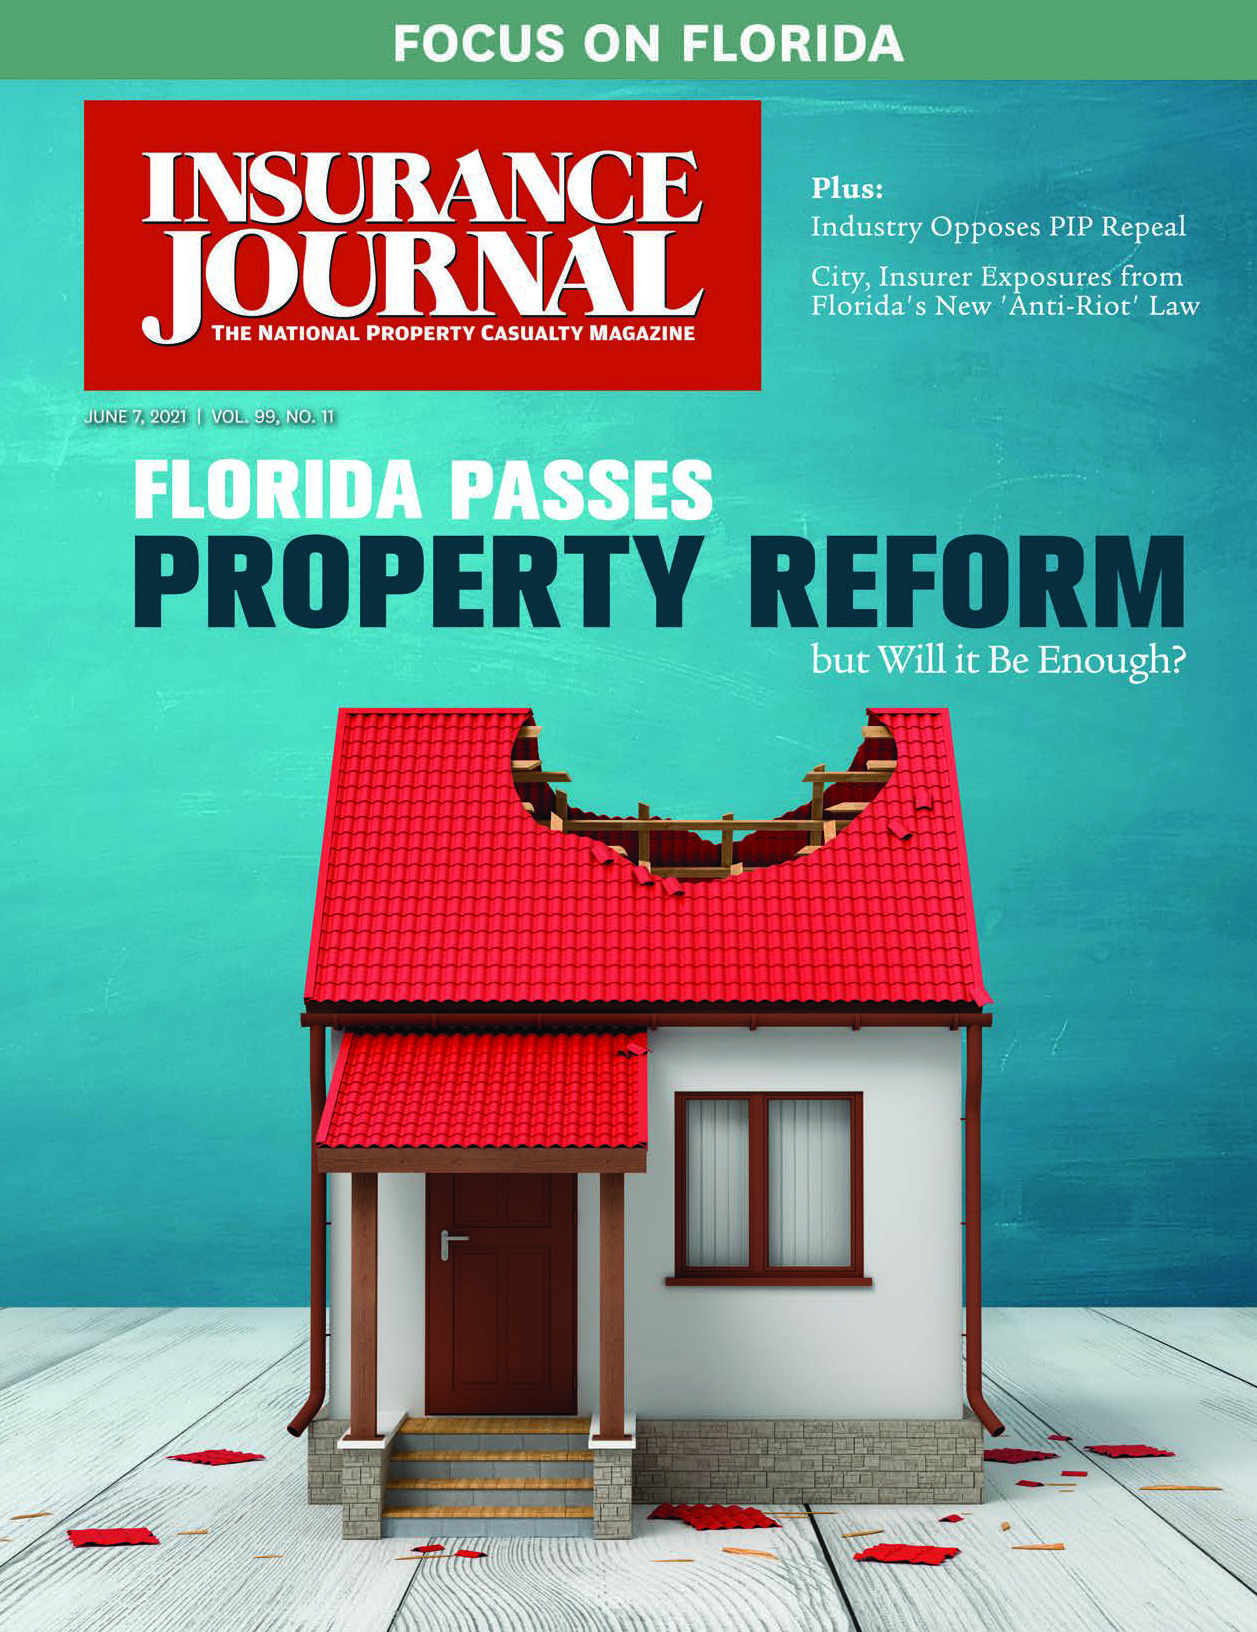 Now Available Insurance Journal’s Focus on Florida Special Edition